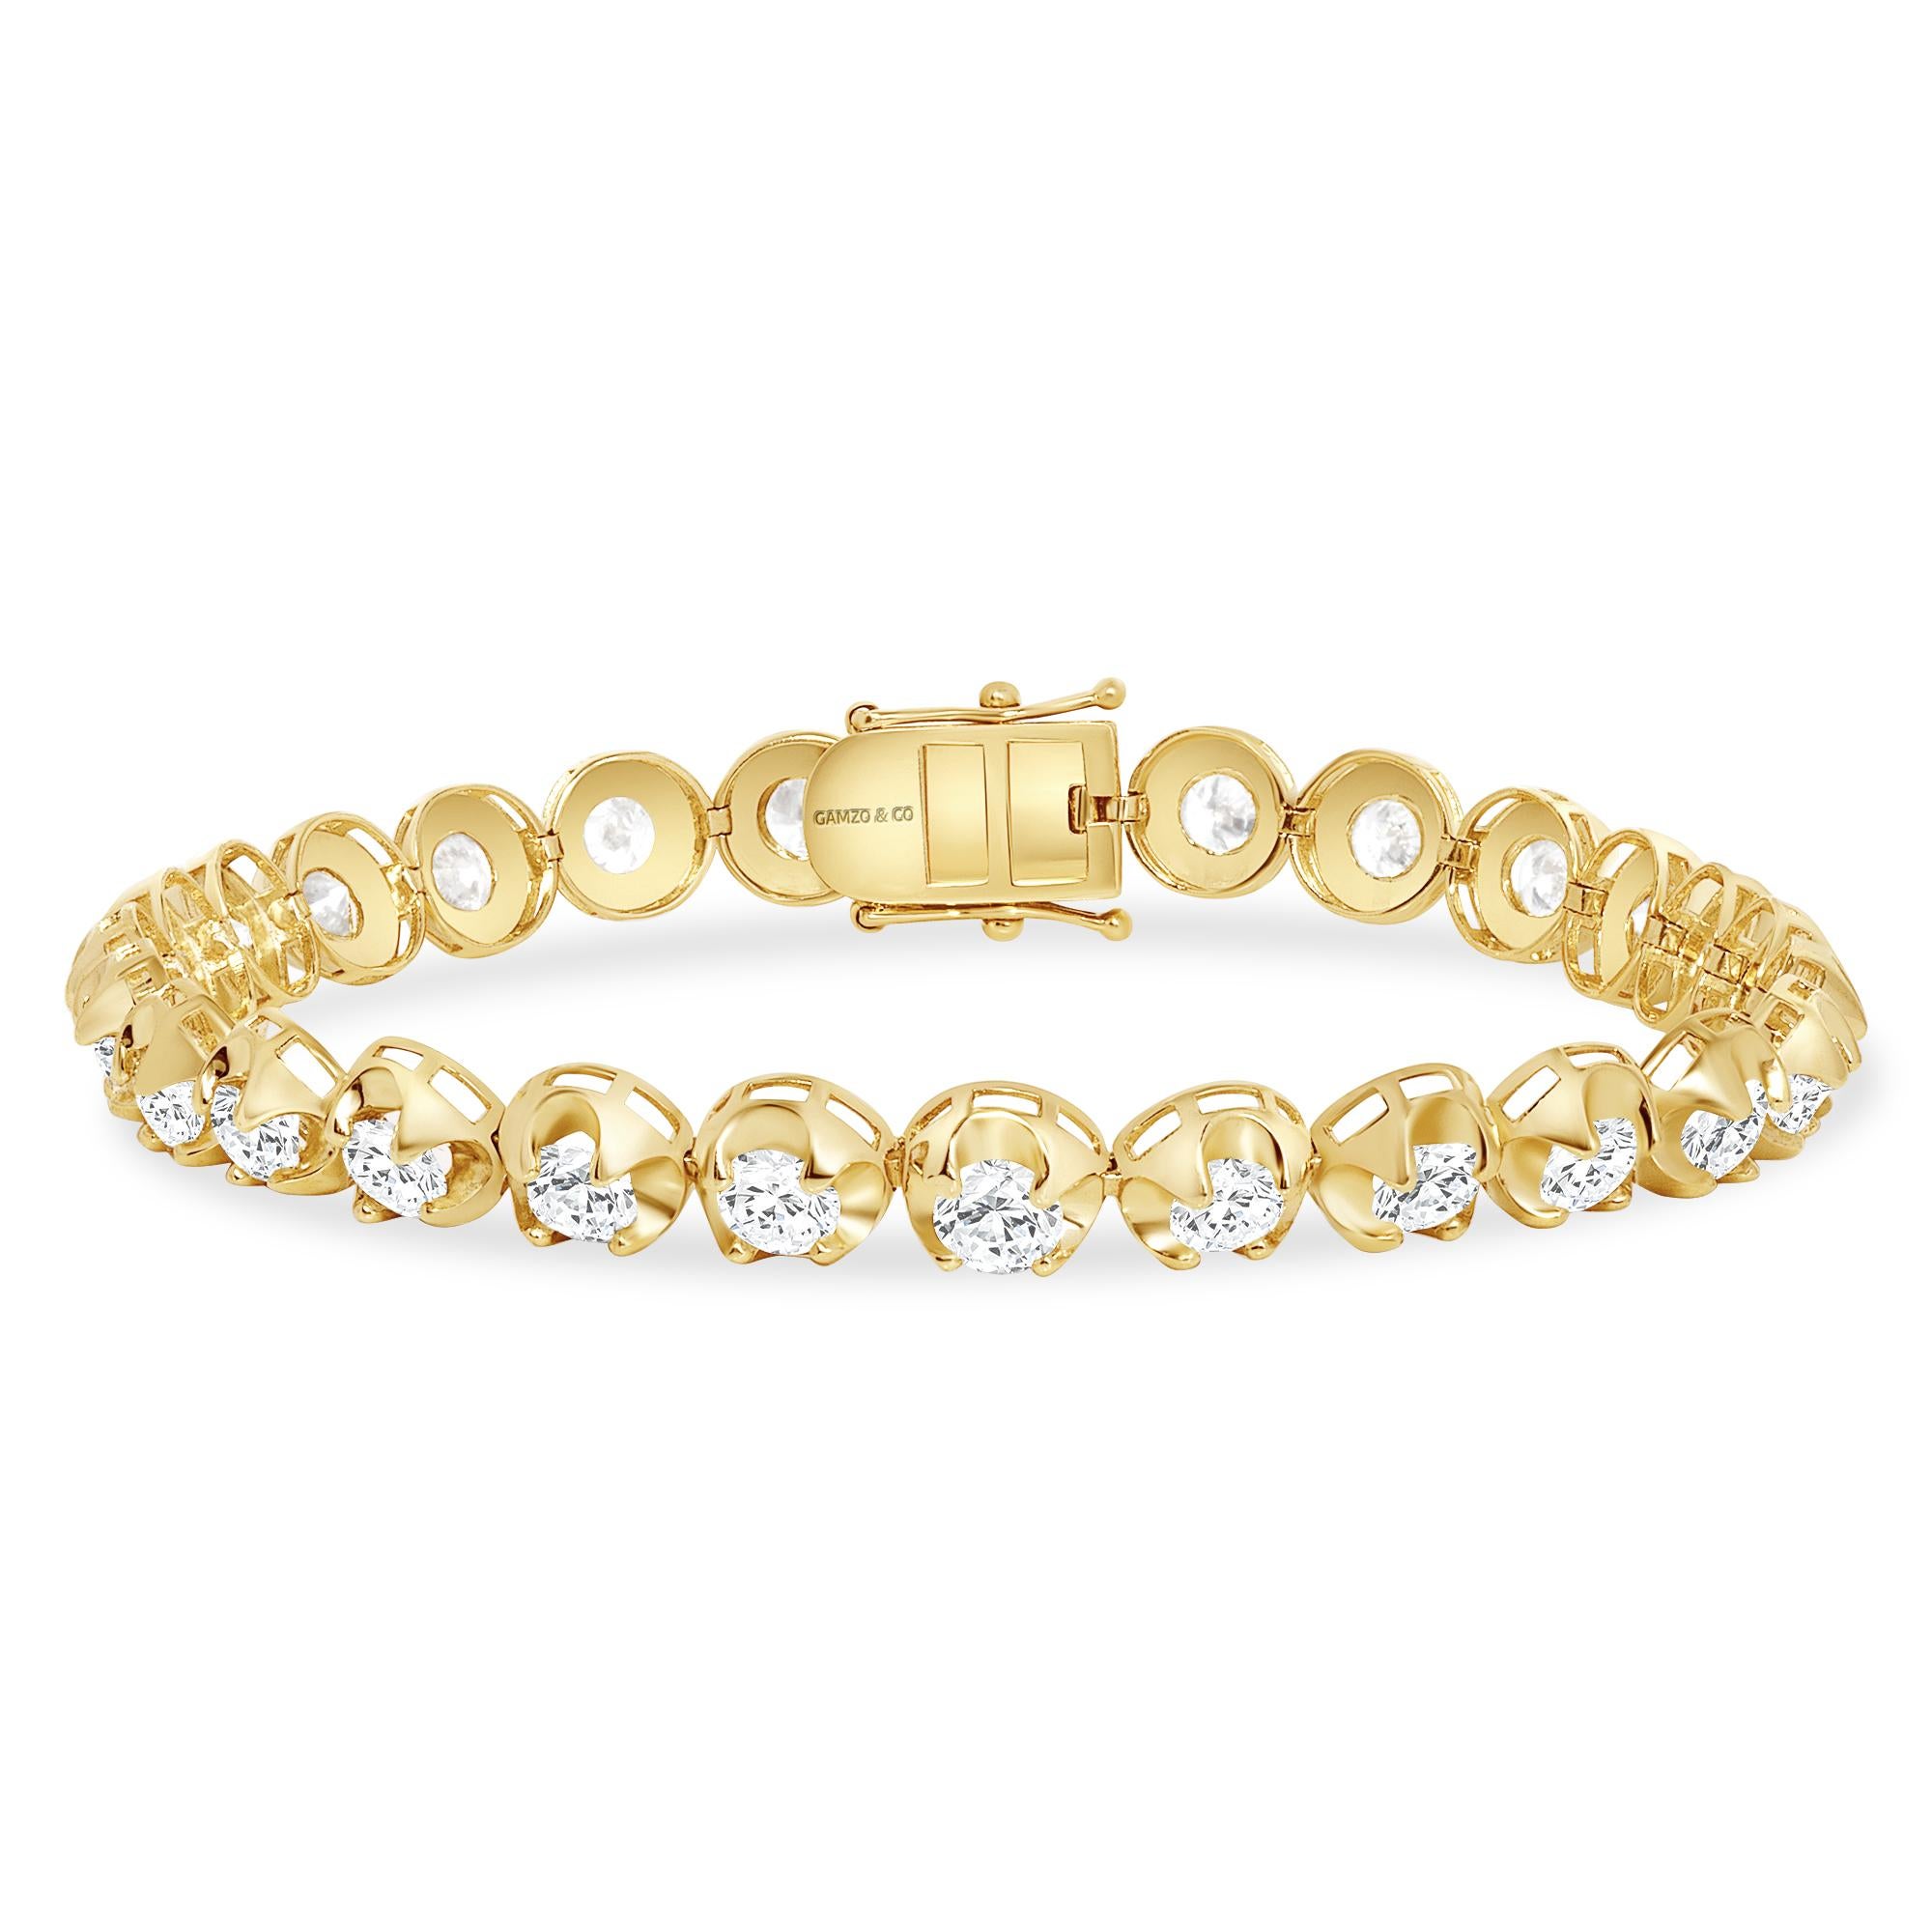 These beautiful round diamonds dance around your wrist as they absorb light and attention.
Metal: 14k Gold
Diamond Cut: Round
Diamond Total Carats: 7ct
Diamond Clarity: VS
Diamond Color: F
Color: Yellow Gold
Bracelet Length: 6 Inches 
Included with